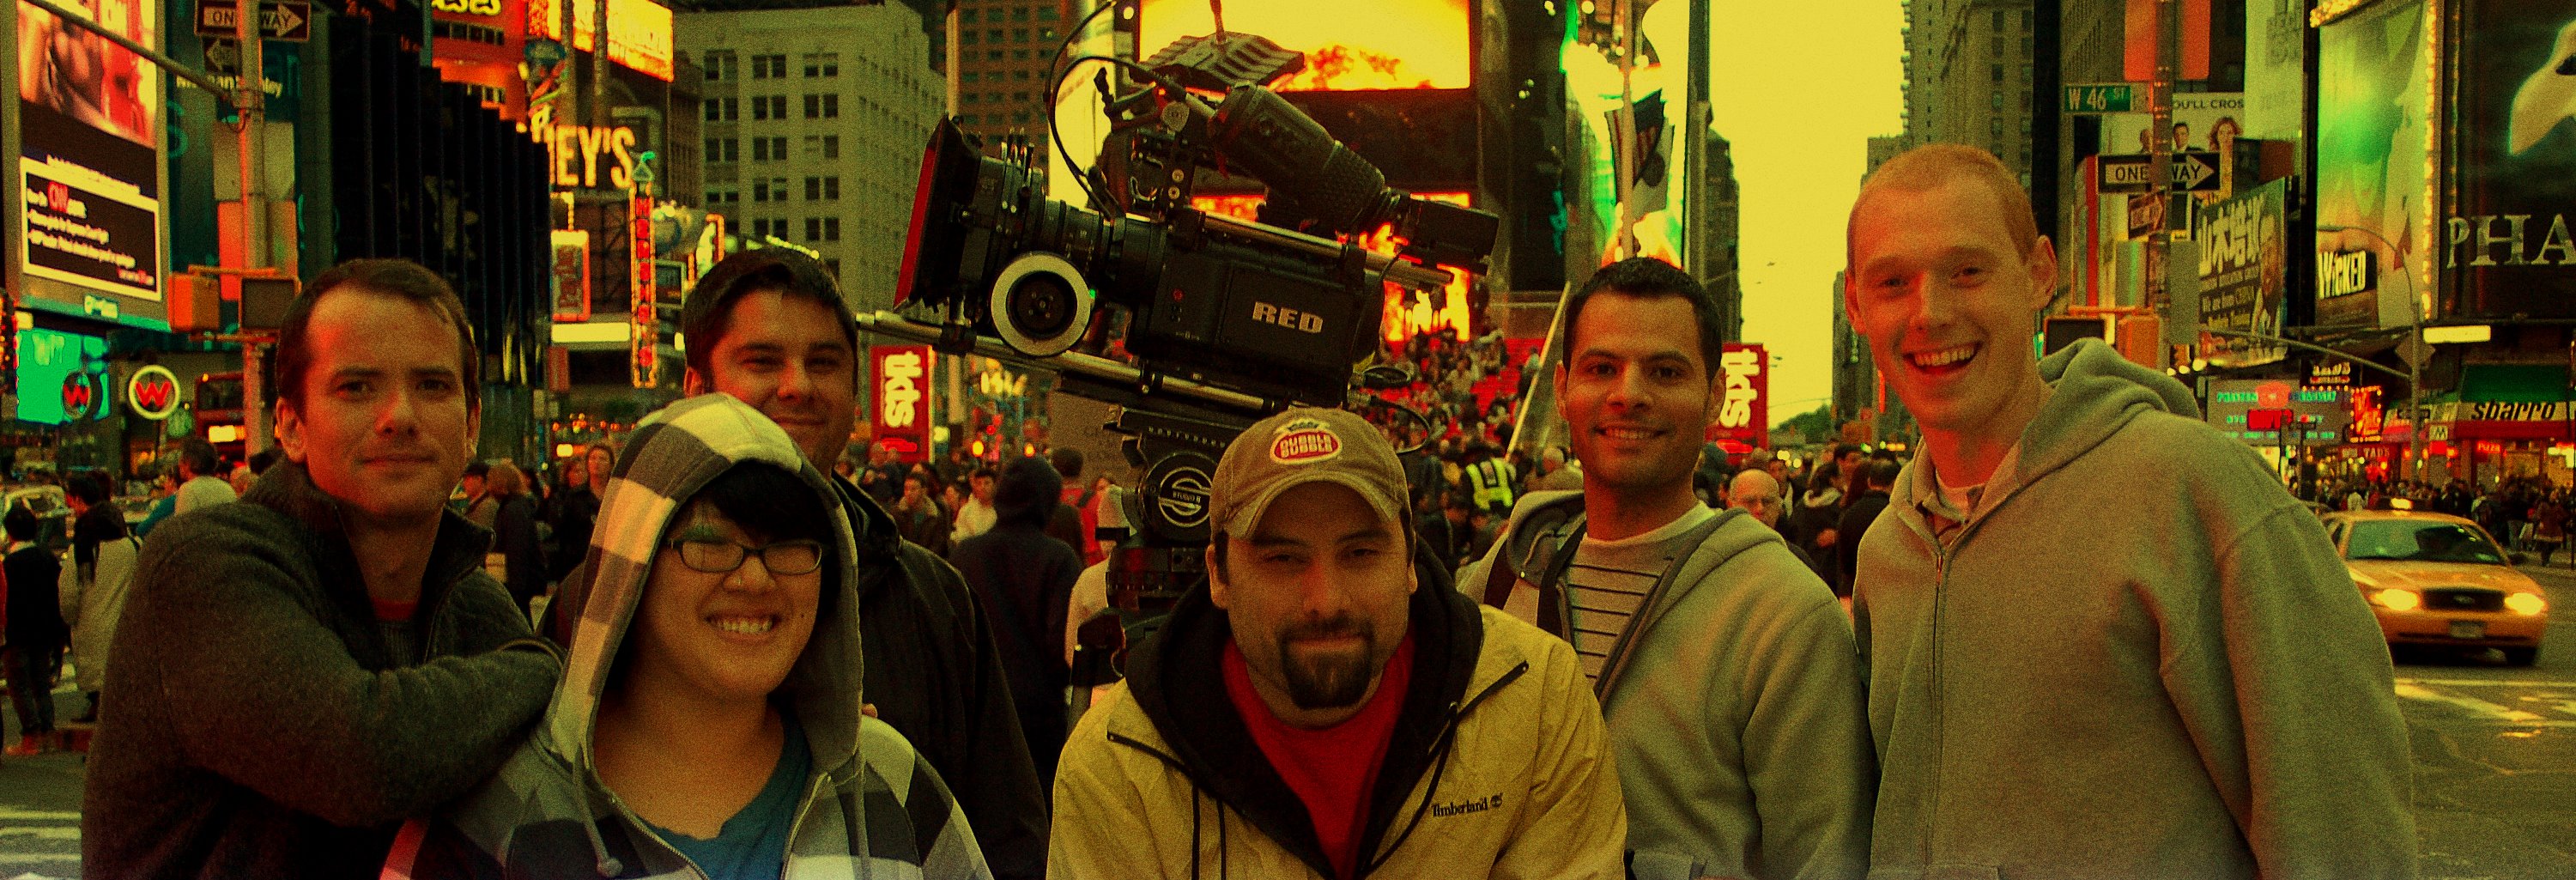 BTS of the movie Tick Tock in Times square